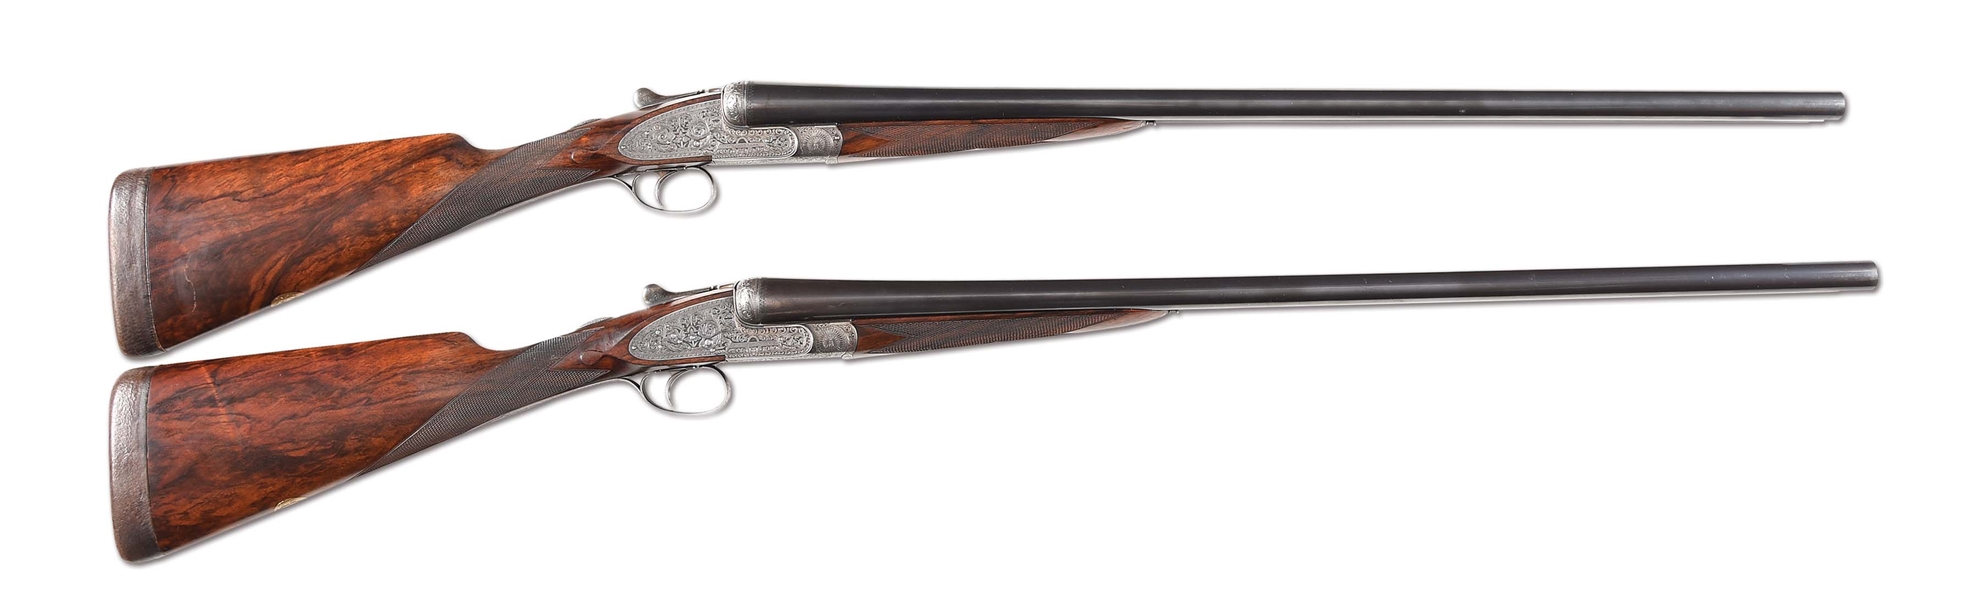 (C) PAIR OF WILLIAM EVANS 12 BORE SIDE BY SIDE SHOTGUNS.